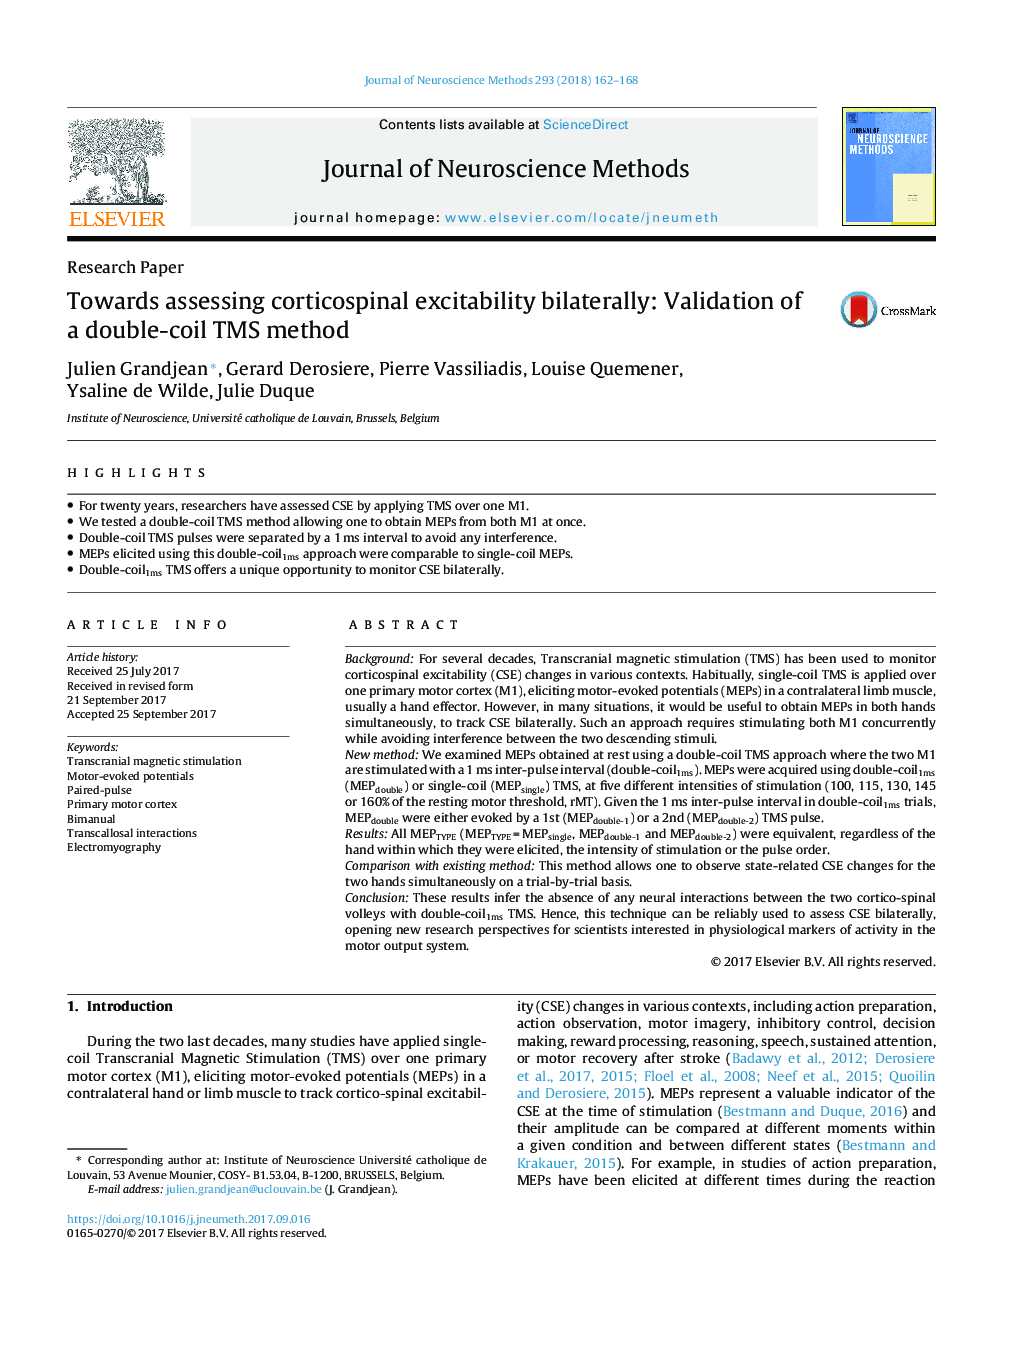 Research PaperTowards assessing corticospinal excitability bilaterally: Validation of a double-coil TMS method